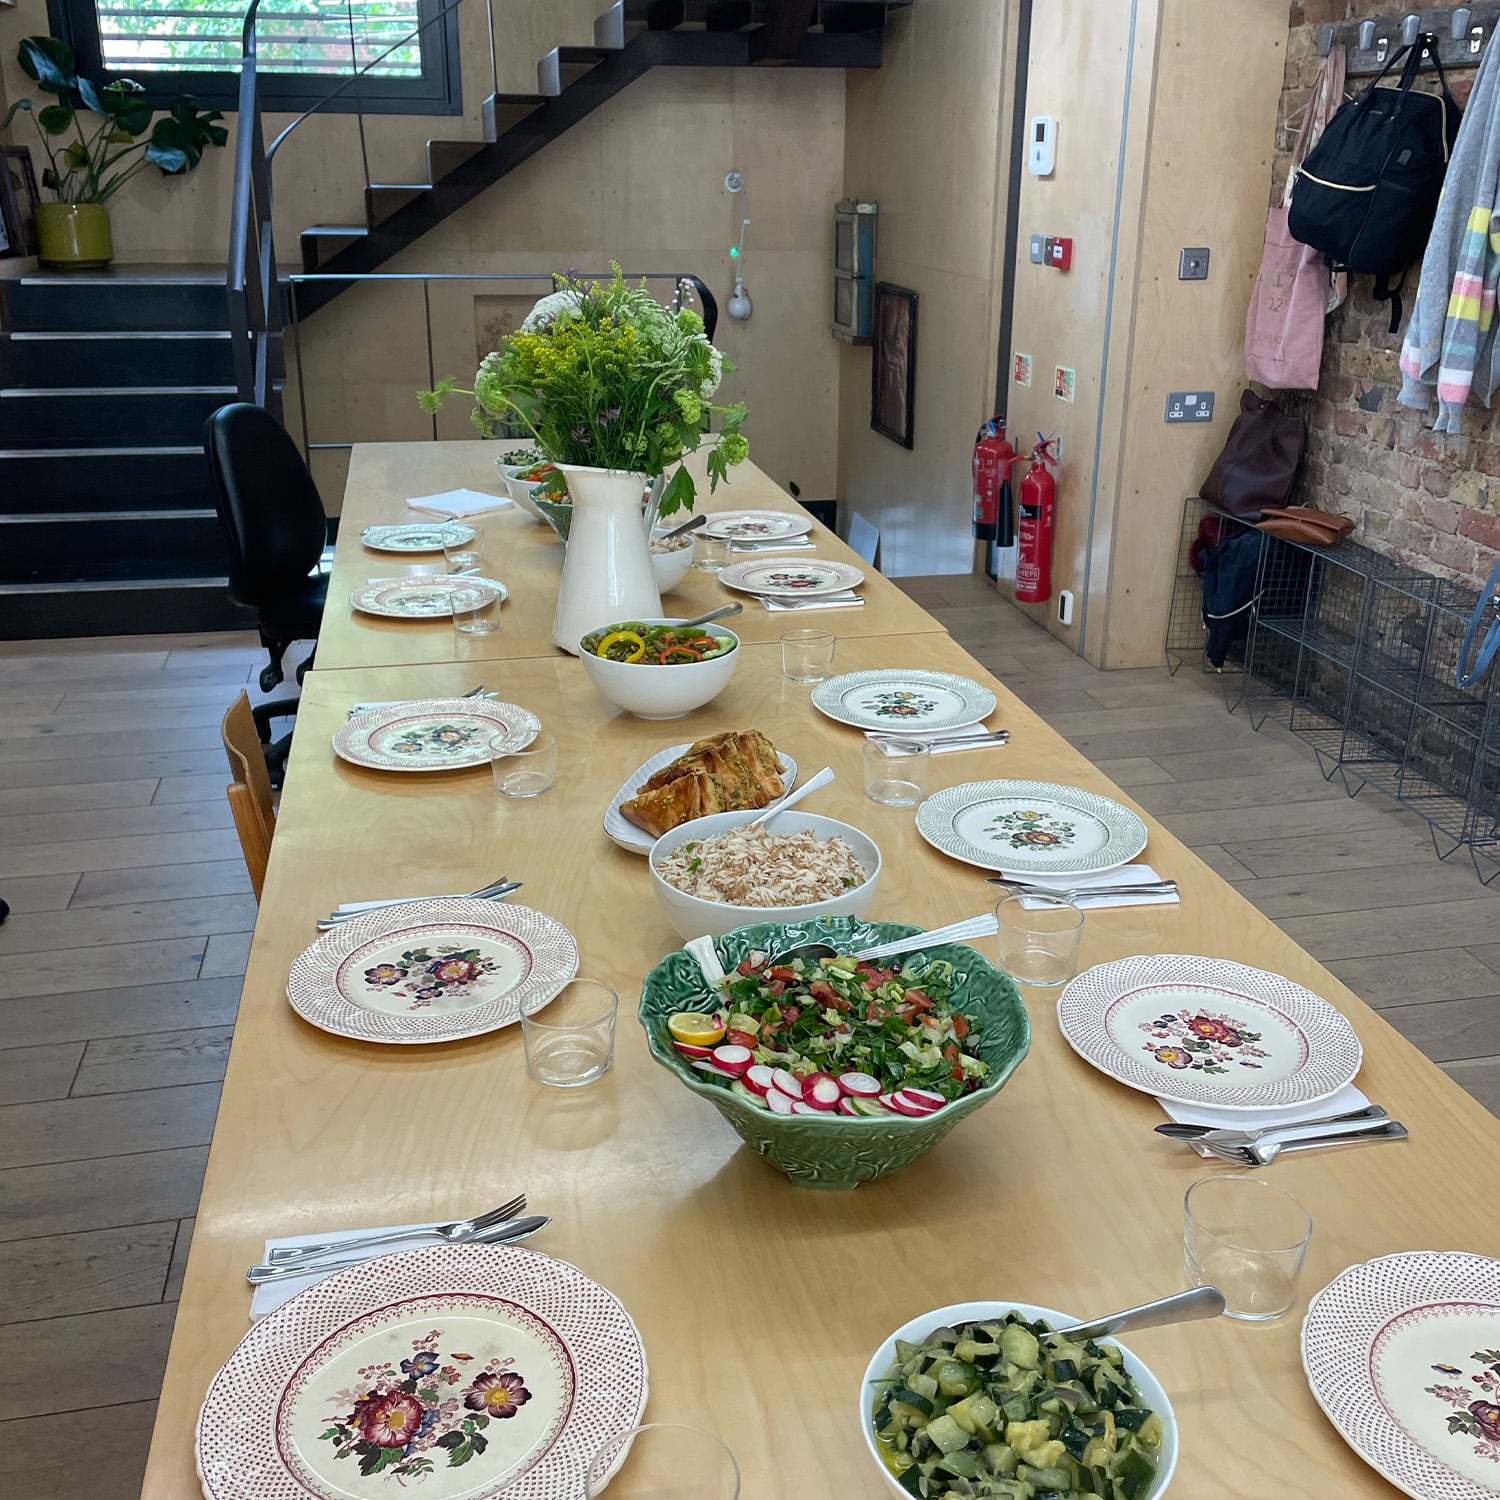 Alex Monroe Jewellery School lunch spread catered by Refugee Cafe